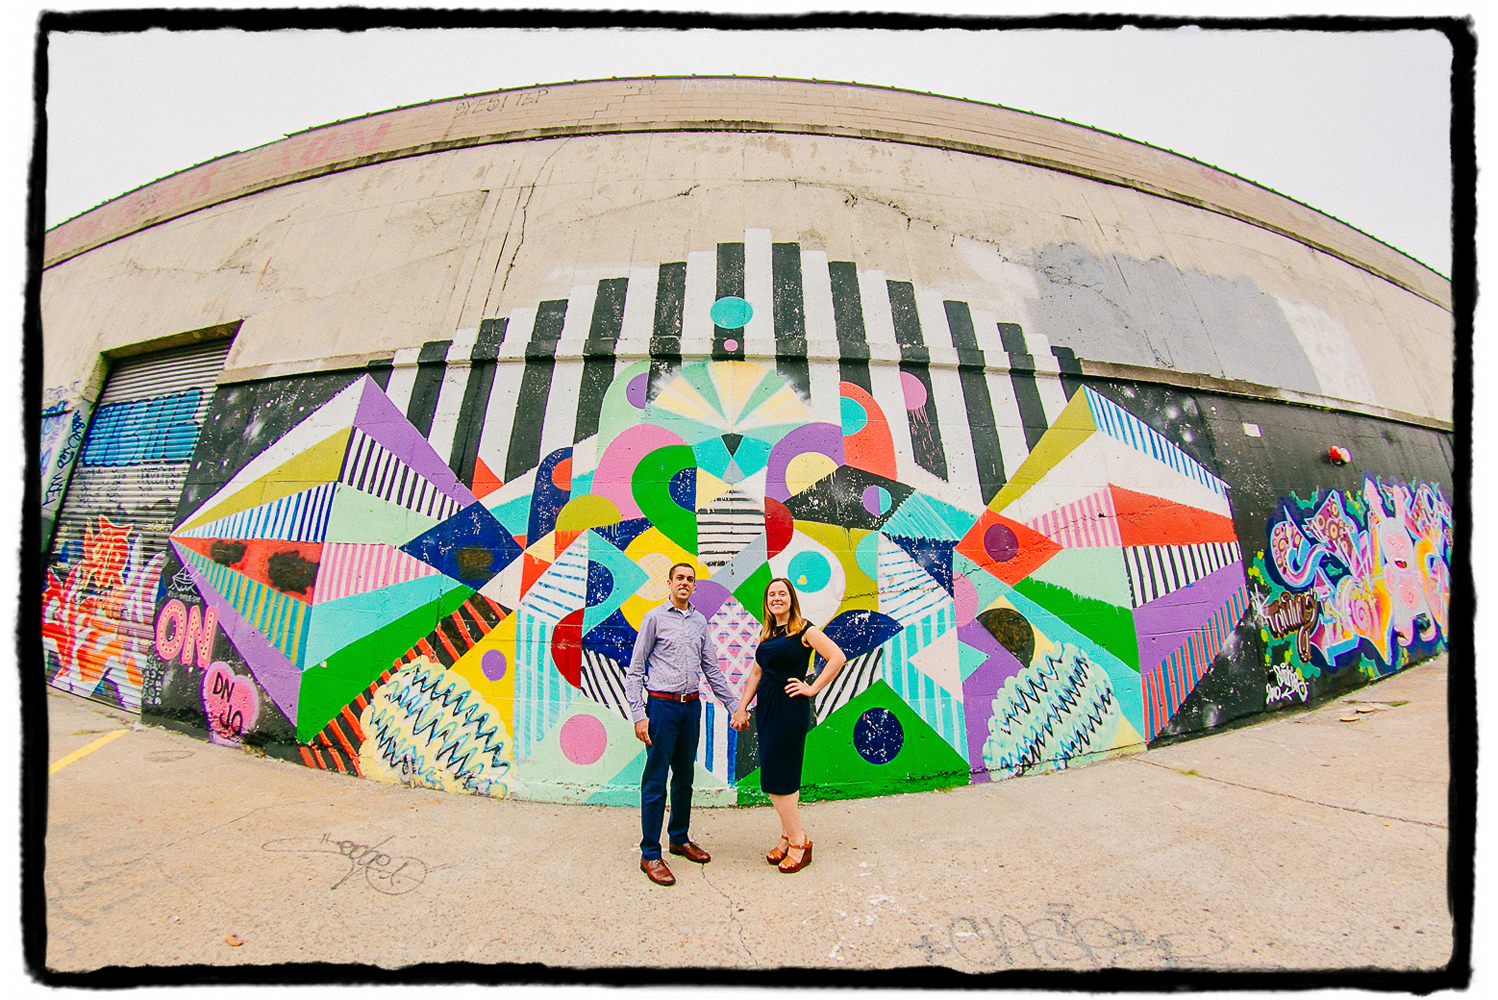 Engagement Portrait: Jessie & Steve let me immortalize them through a fisheye lens with the street art in Greenpoint, Brooklyn.